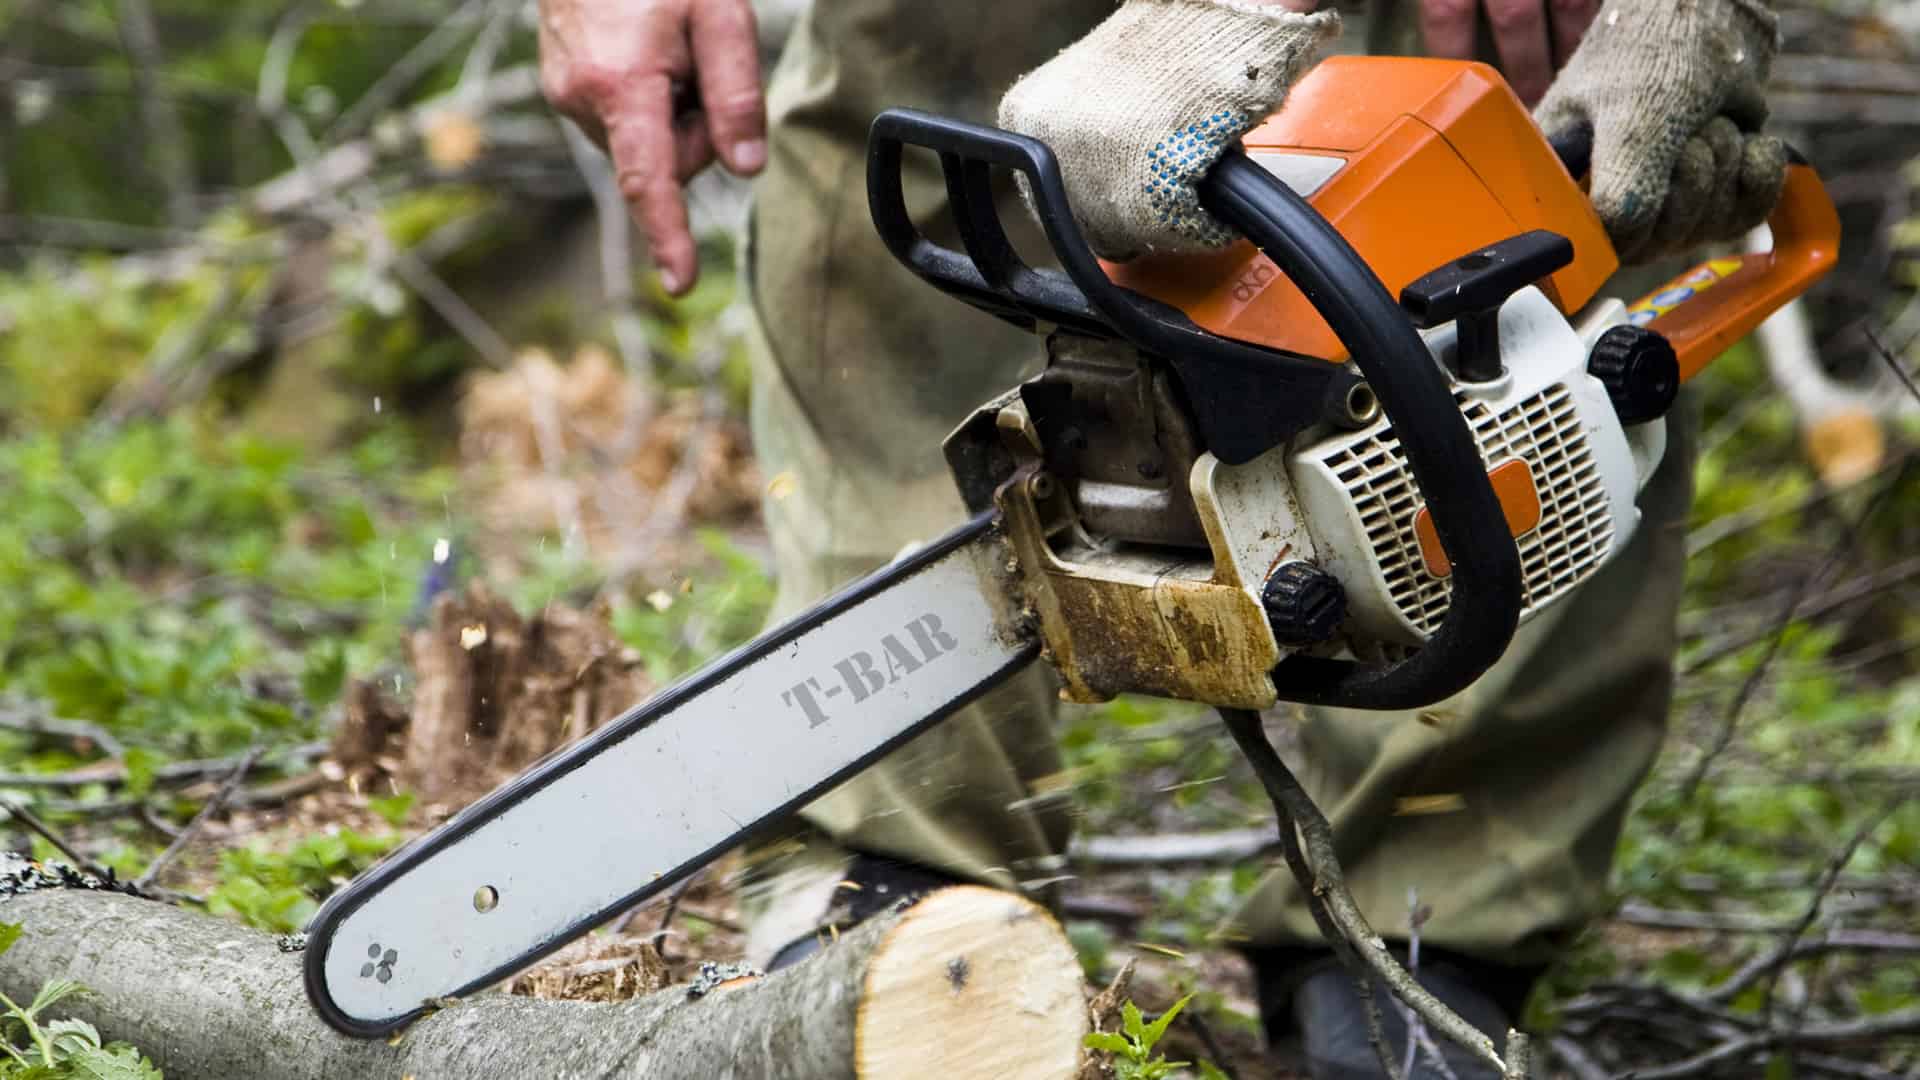 Chainsaw Operation and Safety - Safety Training Video - Safetyhub